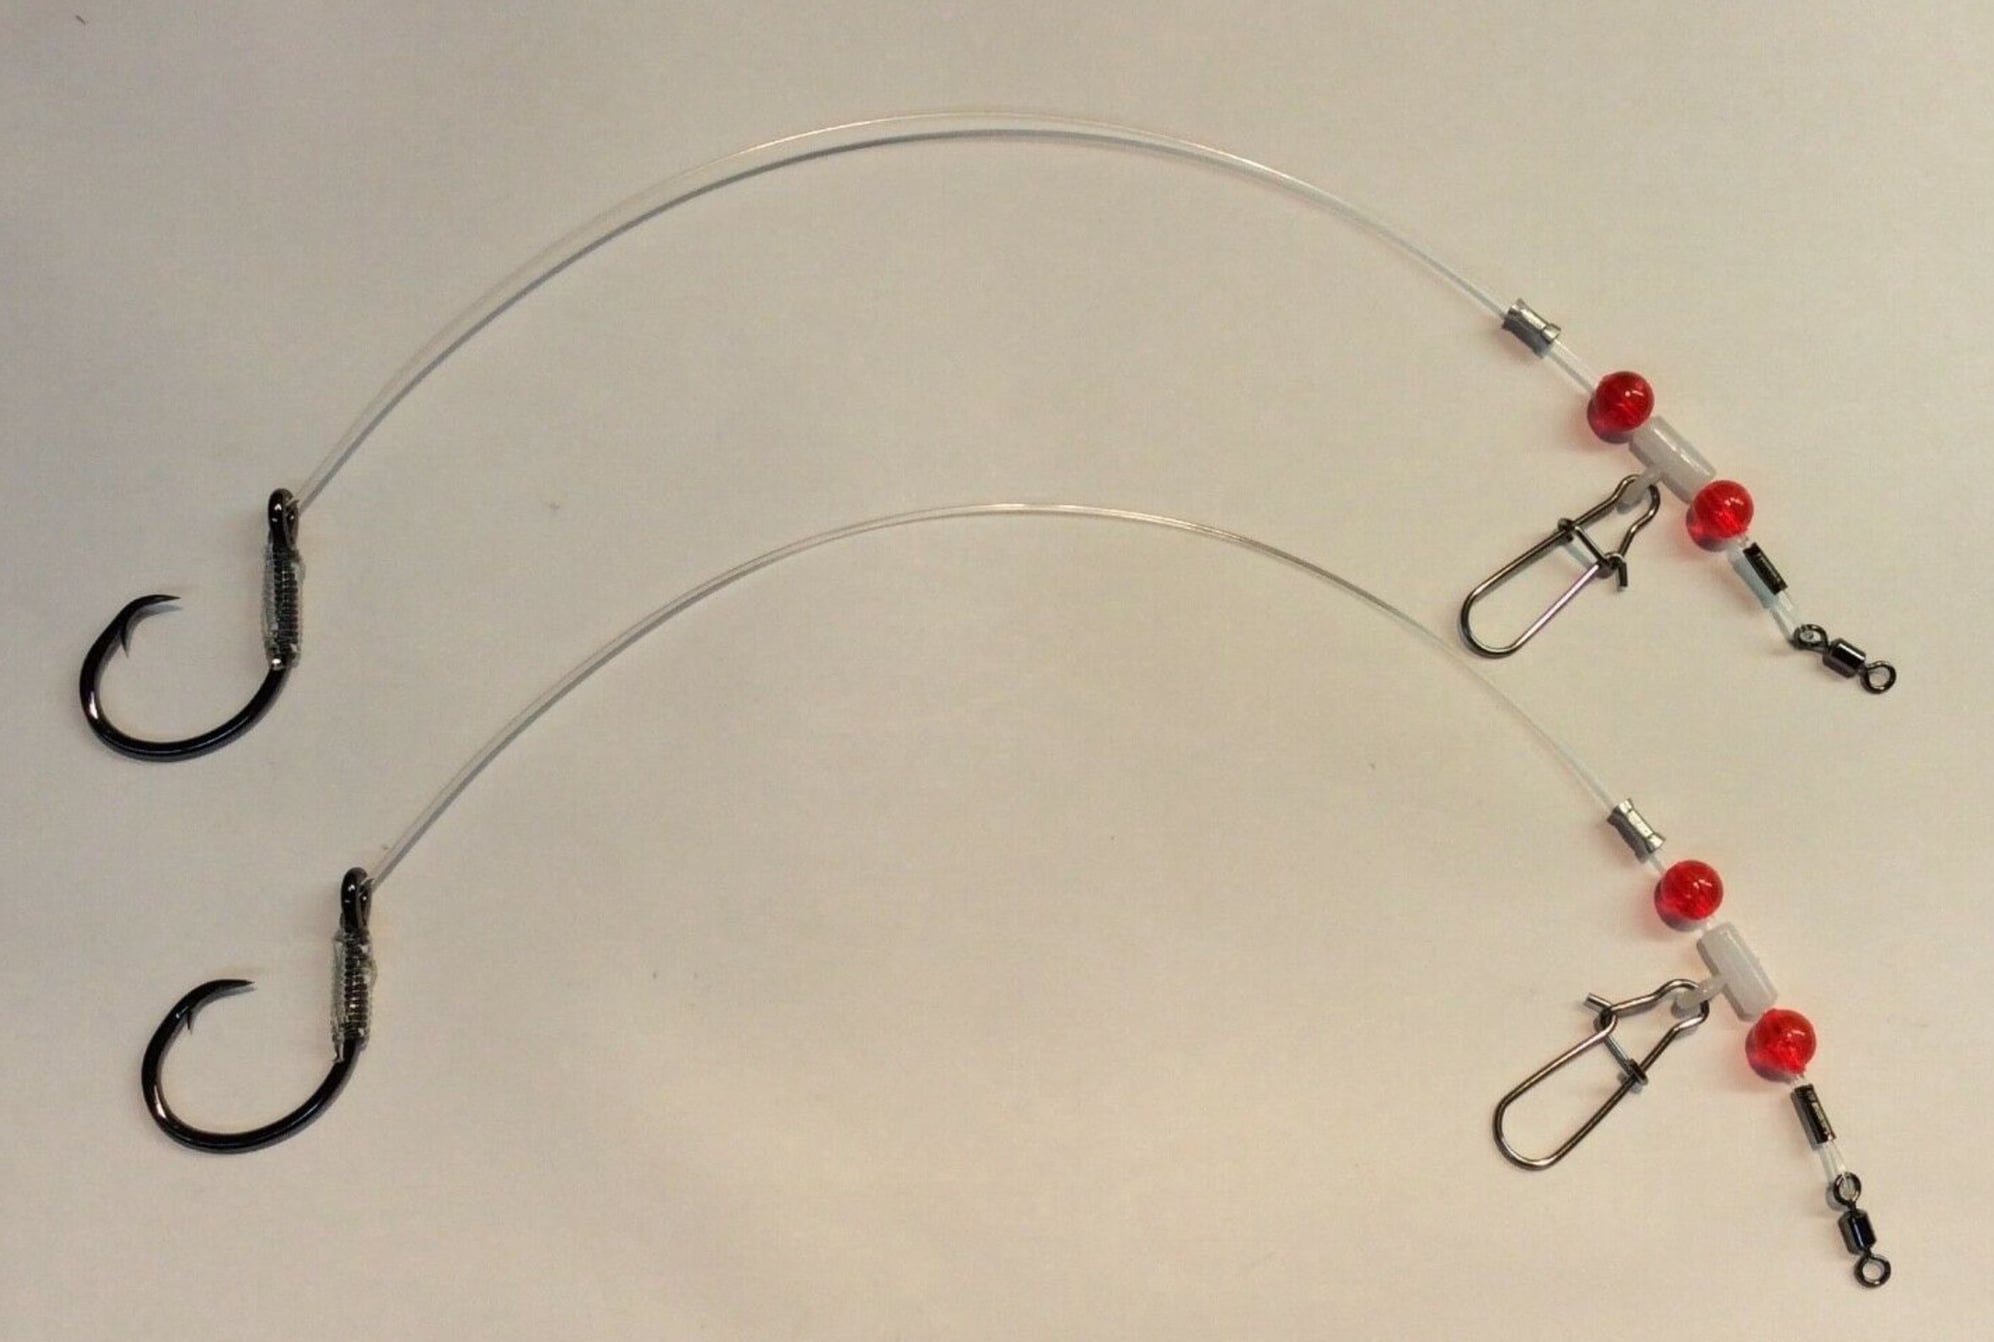 Stop Gut-Hooking Striped Bass, By Using This Type Of Circle Hook